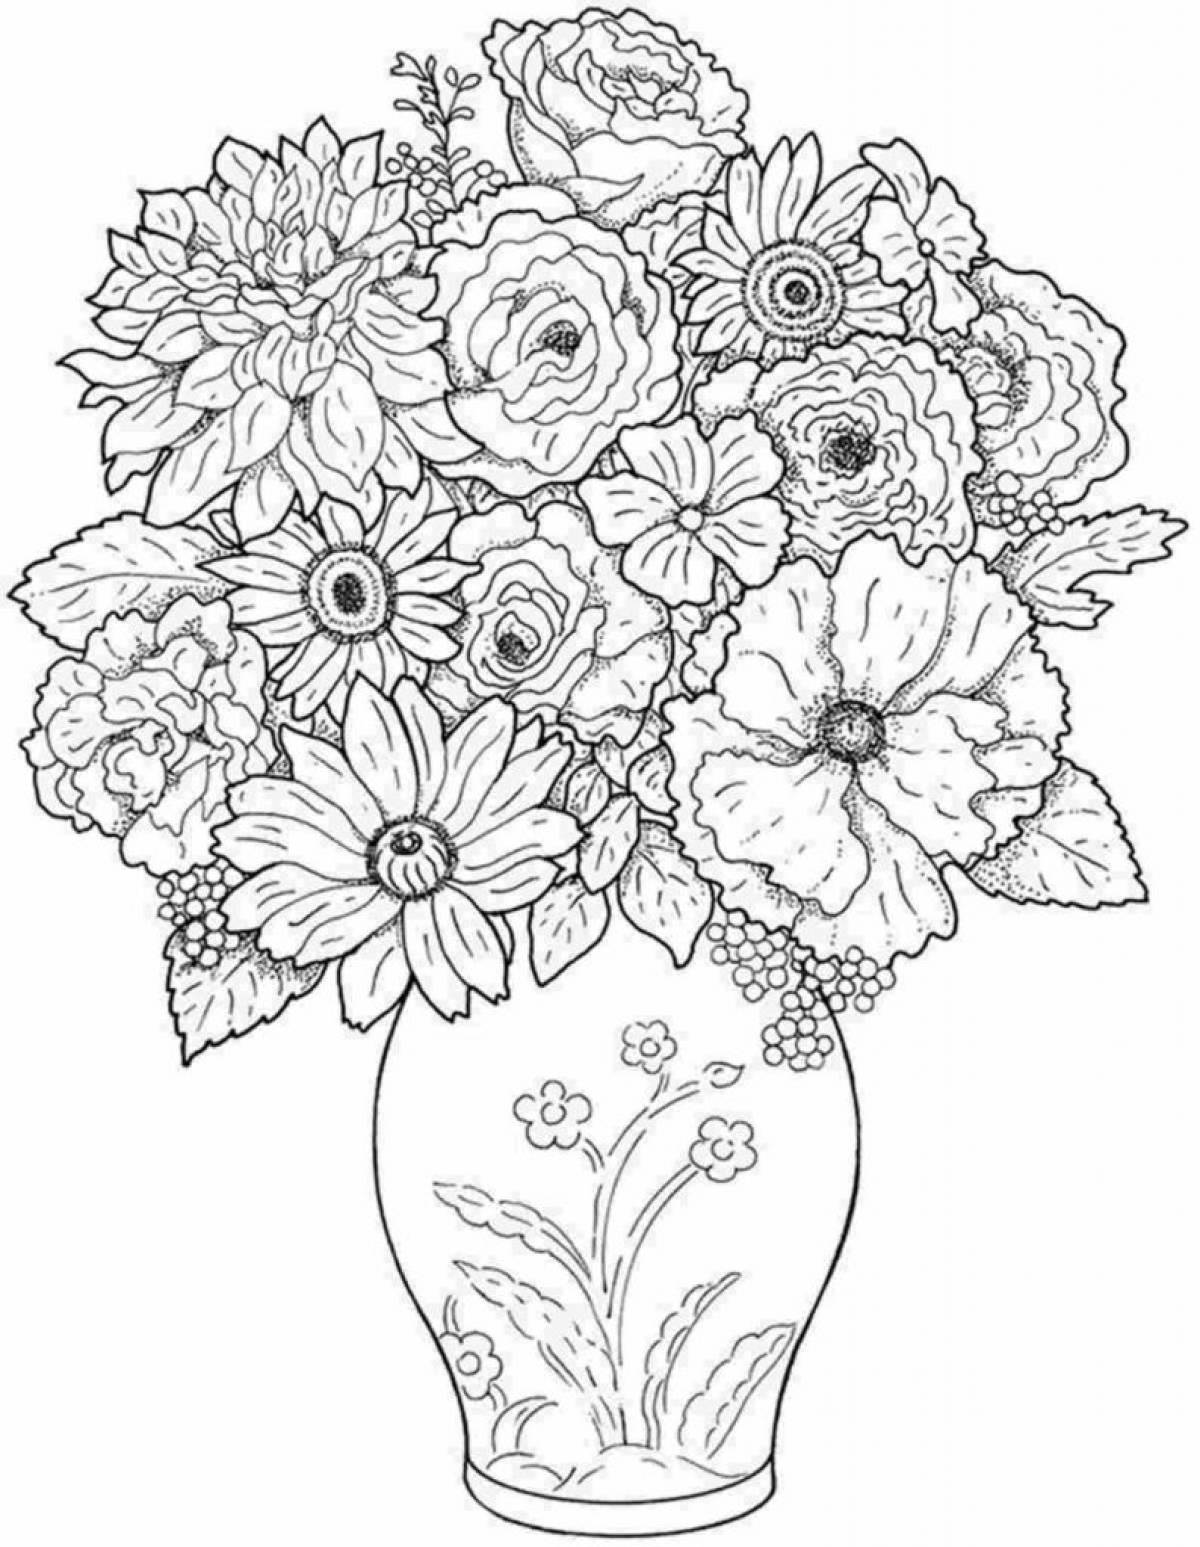 Coloring book glowing bouquet of flowers in a vase